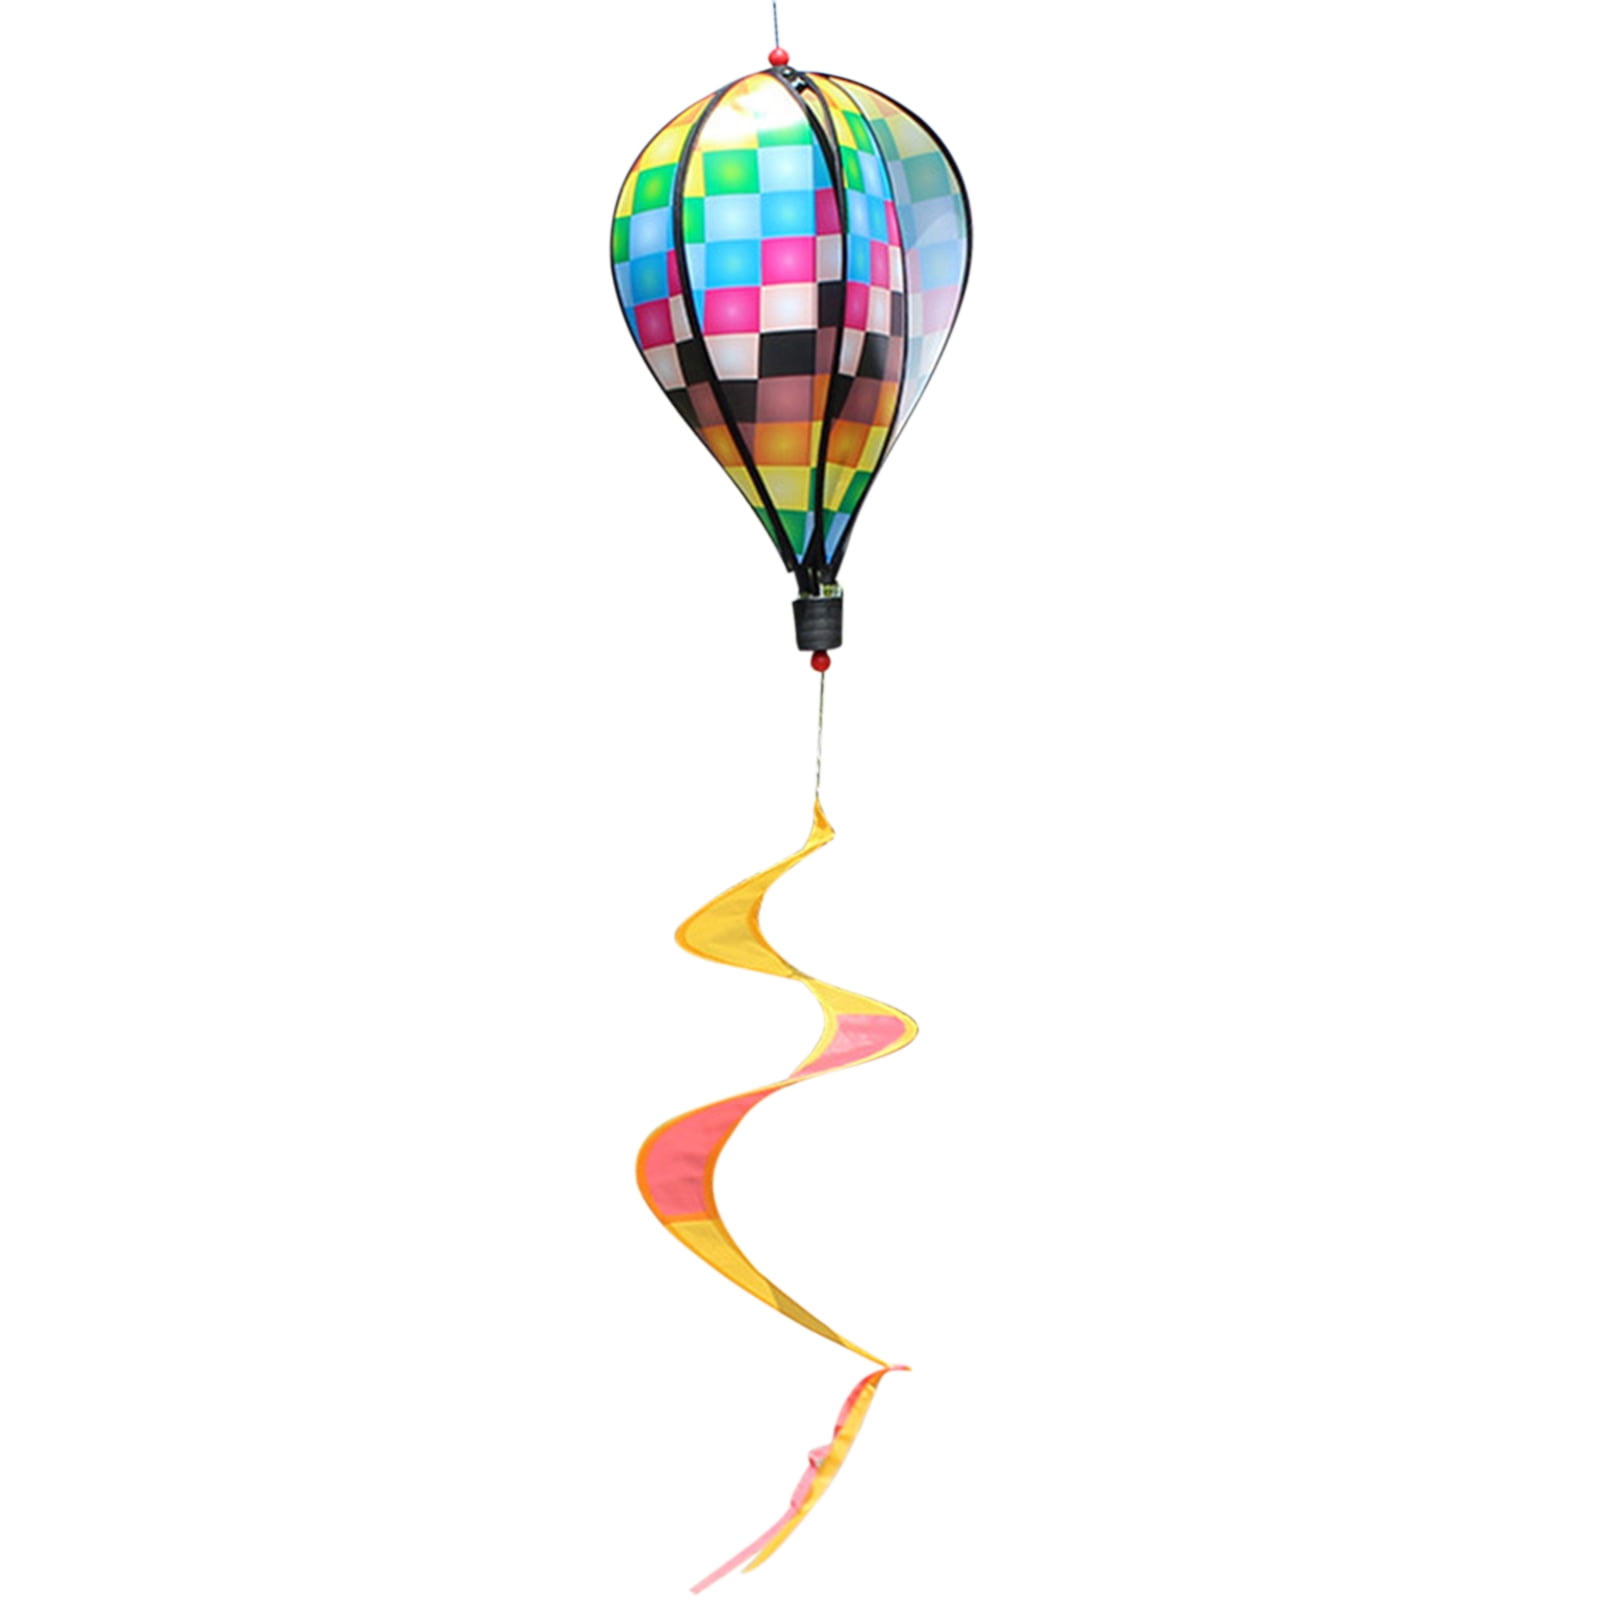 Wind chimes balloon hot air balloon wind spinner wind spiral set of 3